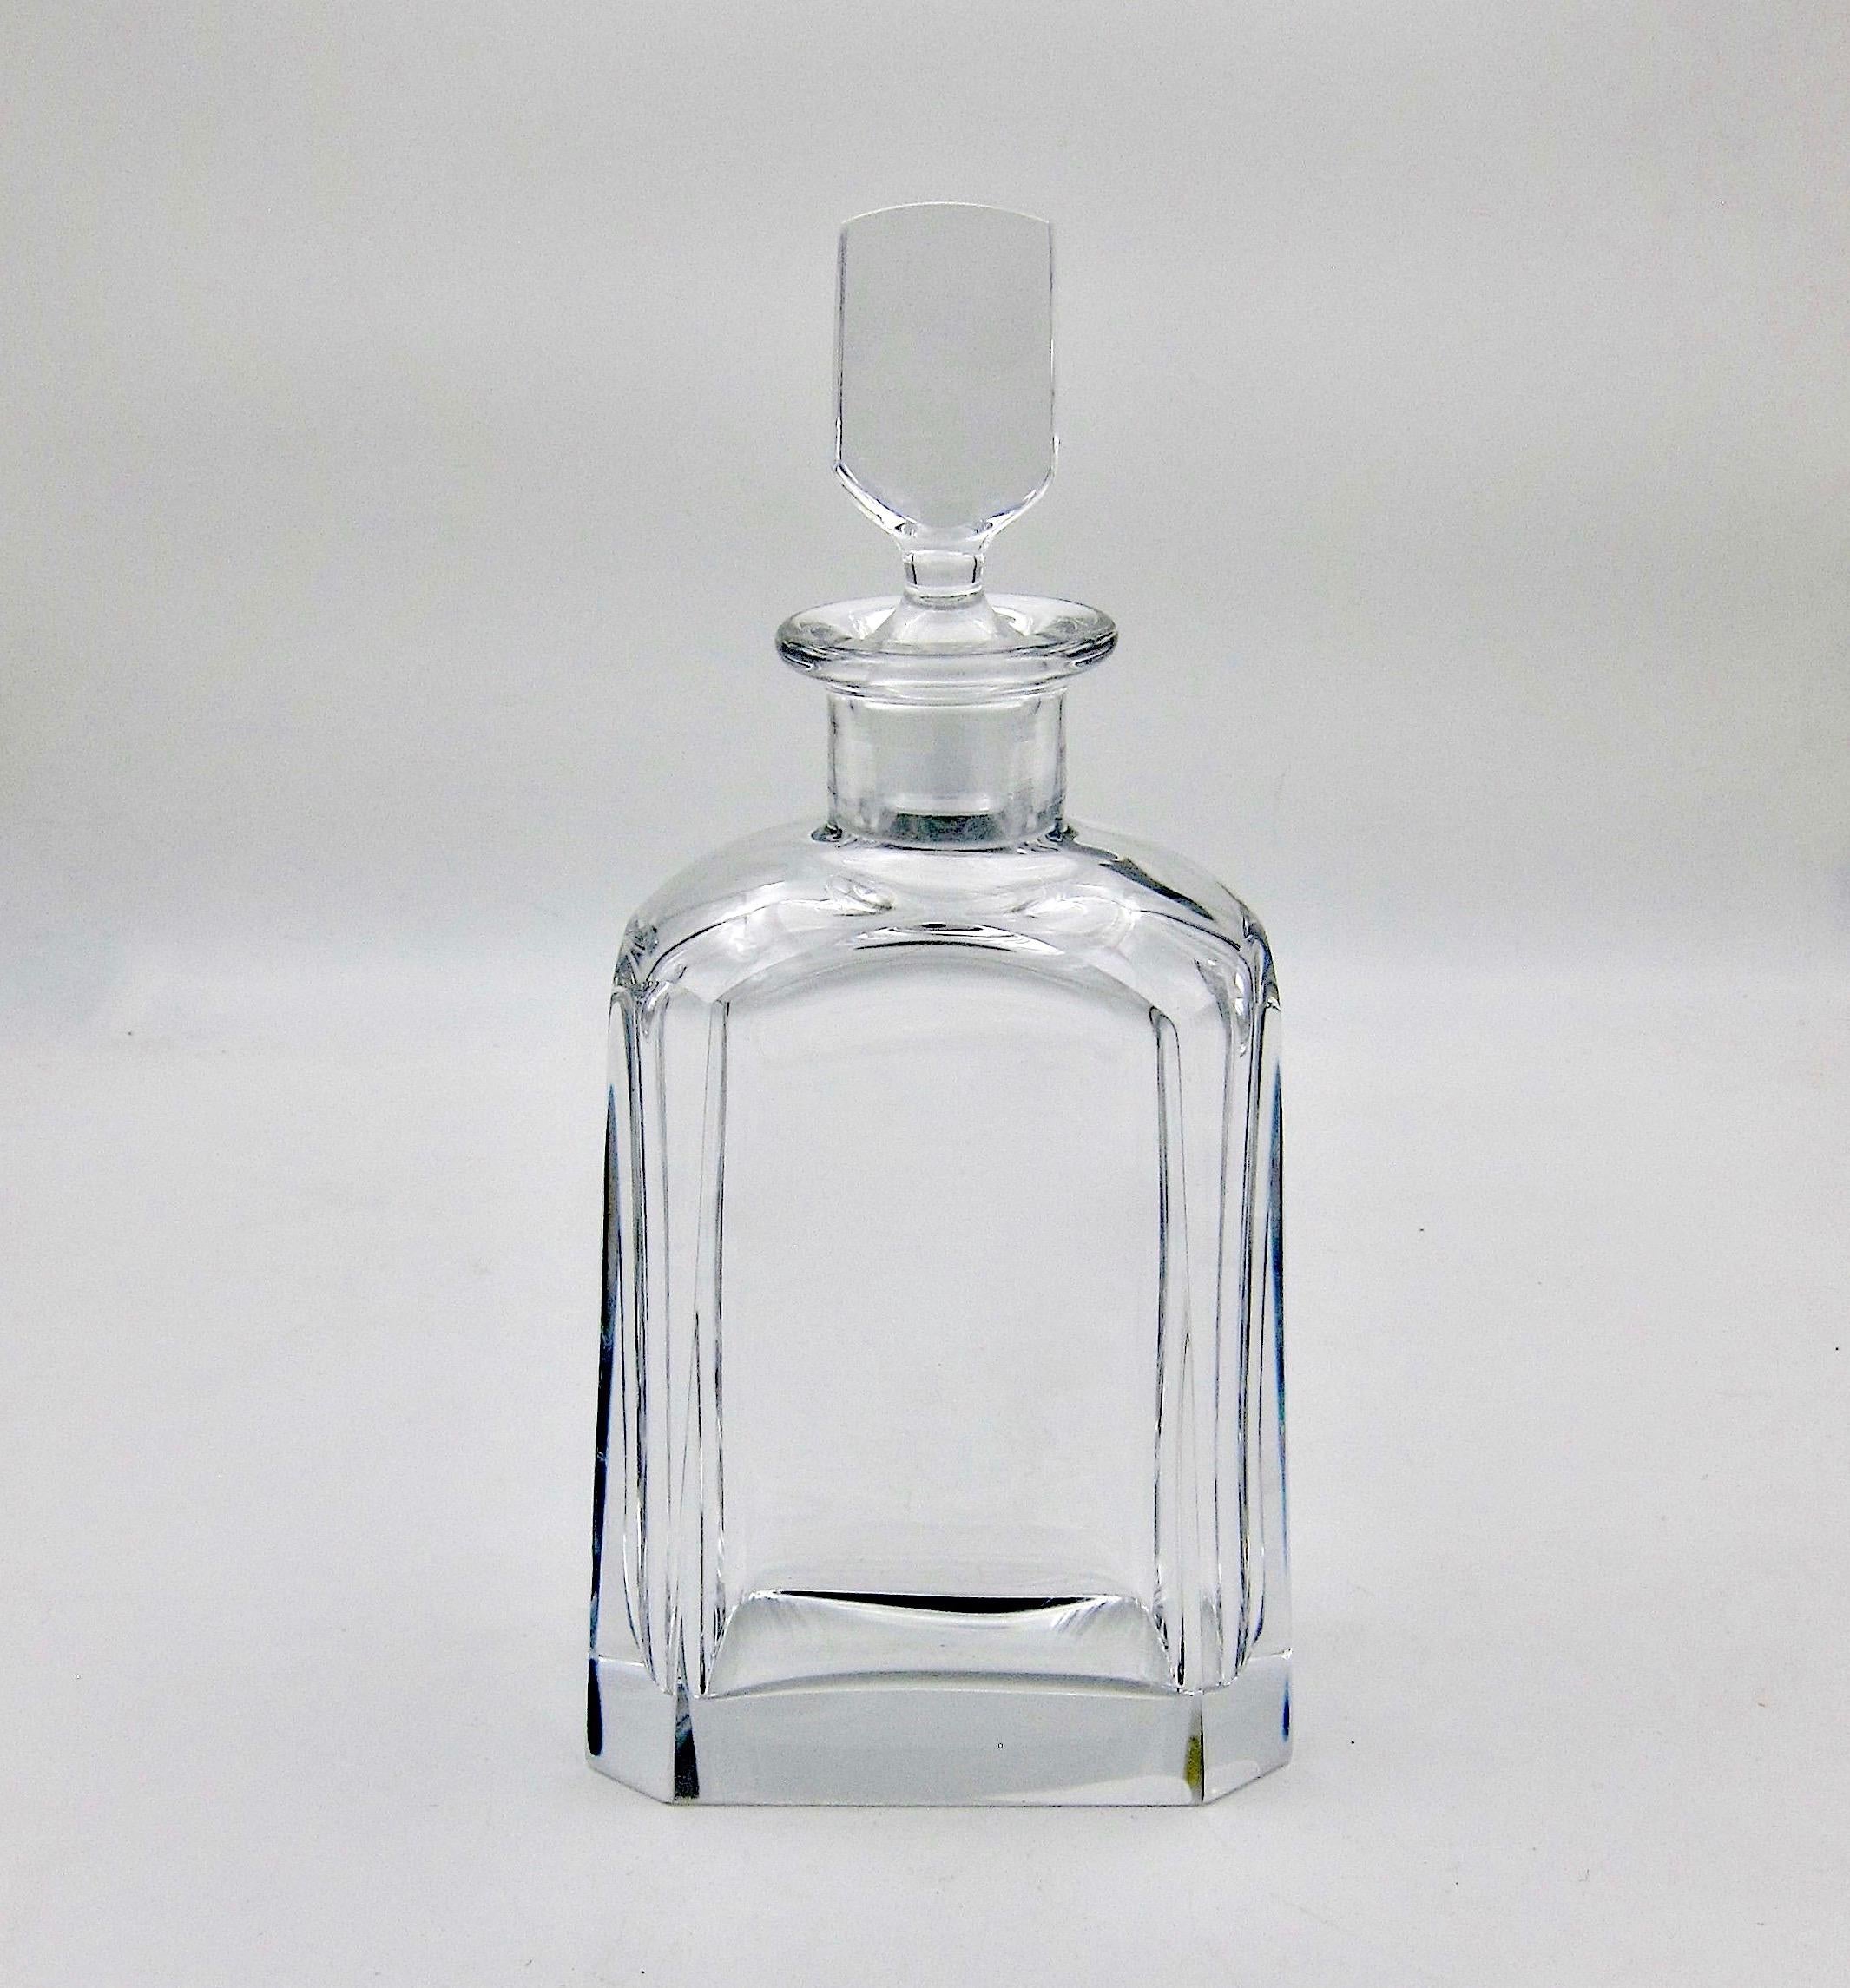 A vintage Scandinavian cut crystal decanter designed by Sven Palmqvist (Palmquist) for Orrefors of Sweden. The elegant and minimal spirit decanter of heavy clear crystal features a substantial base, four canted corners, and its original stopper.